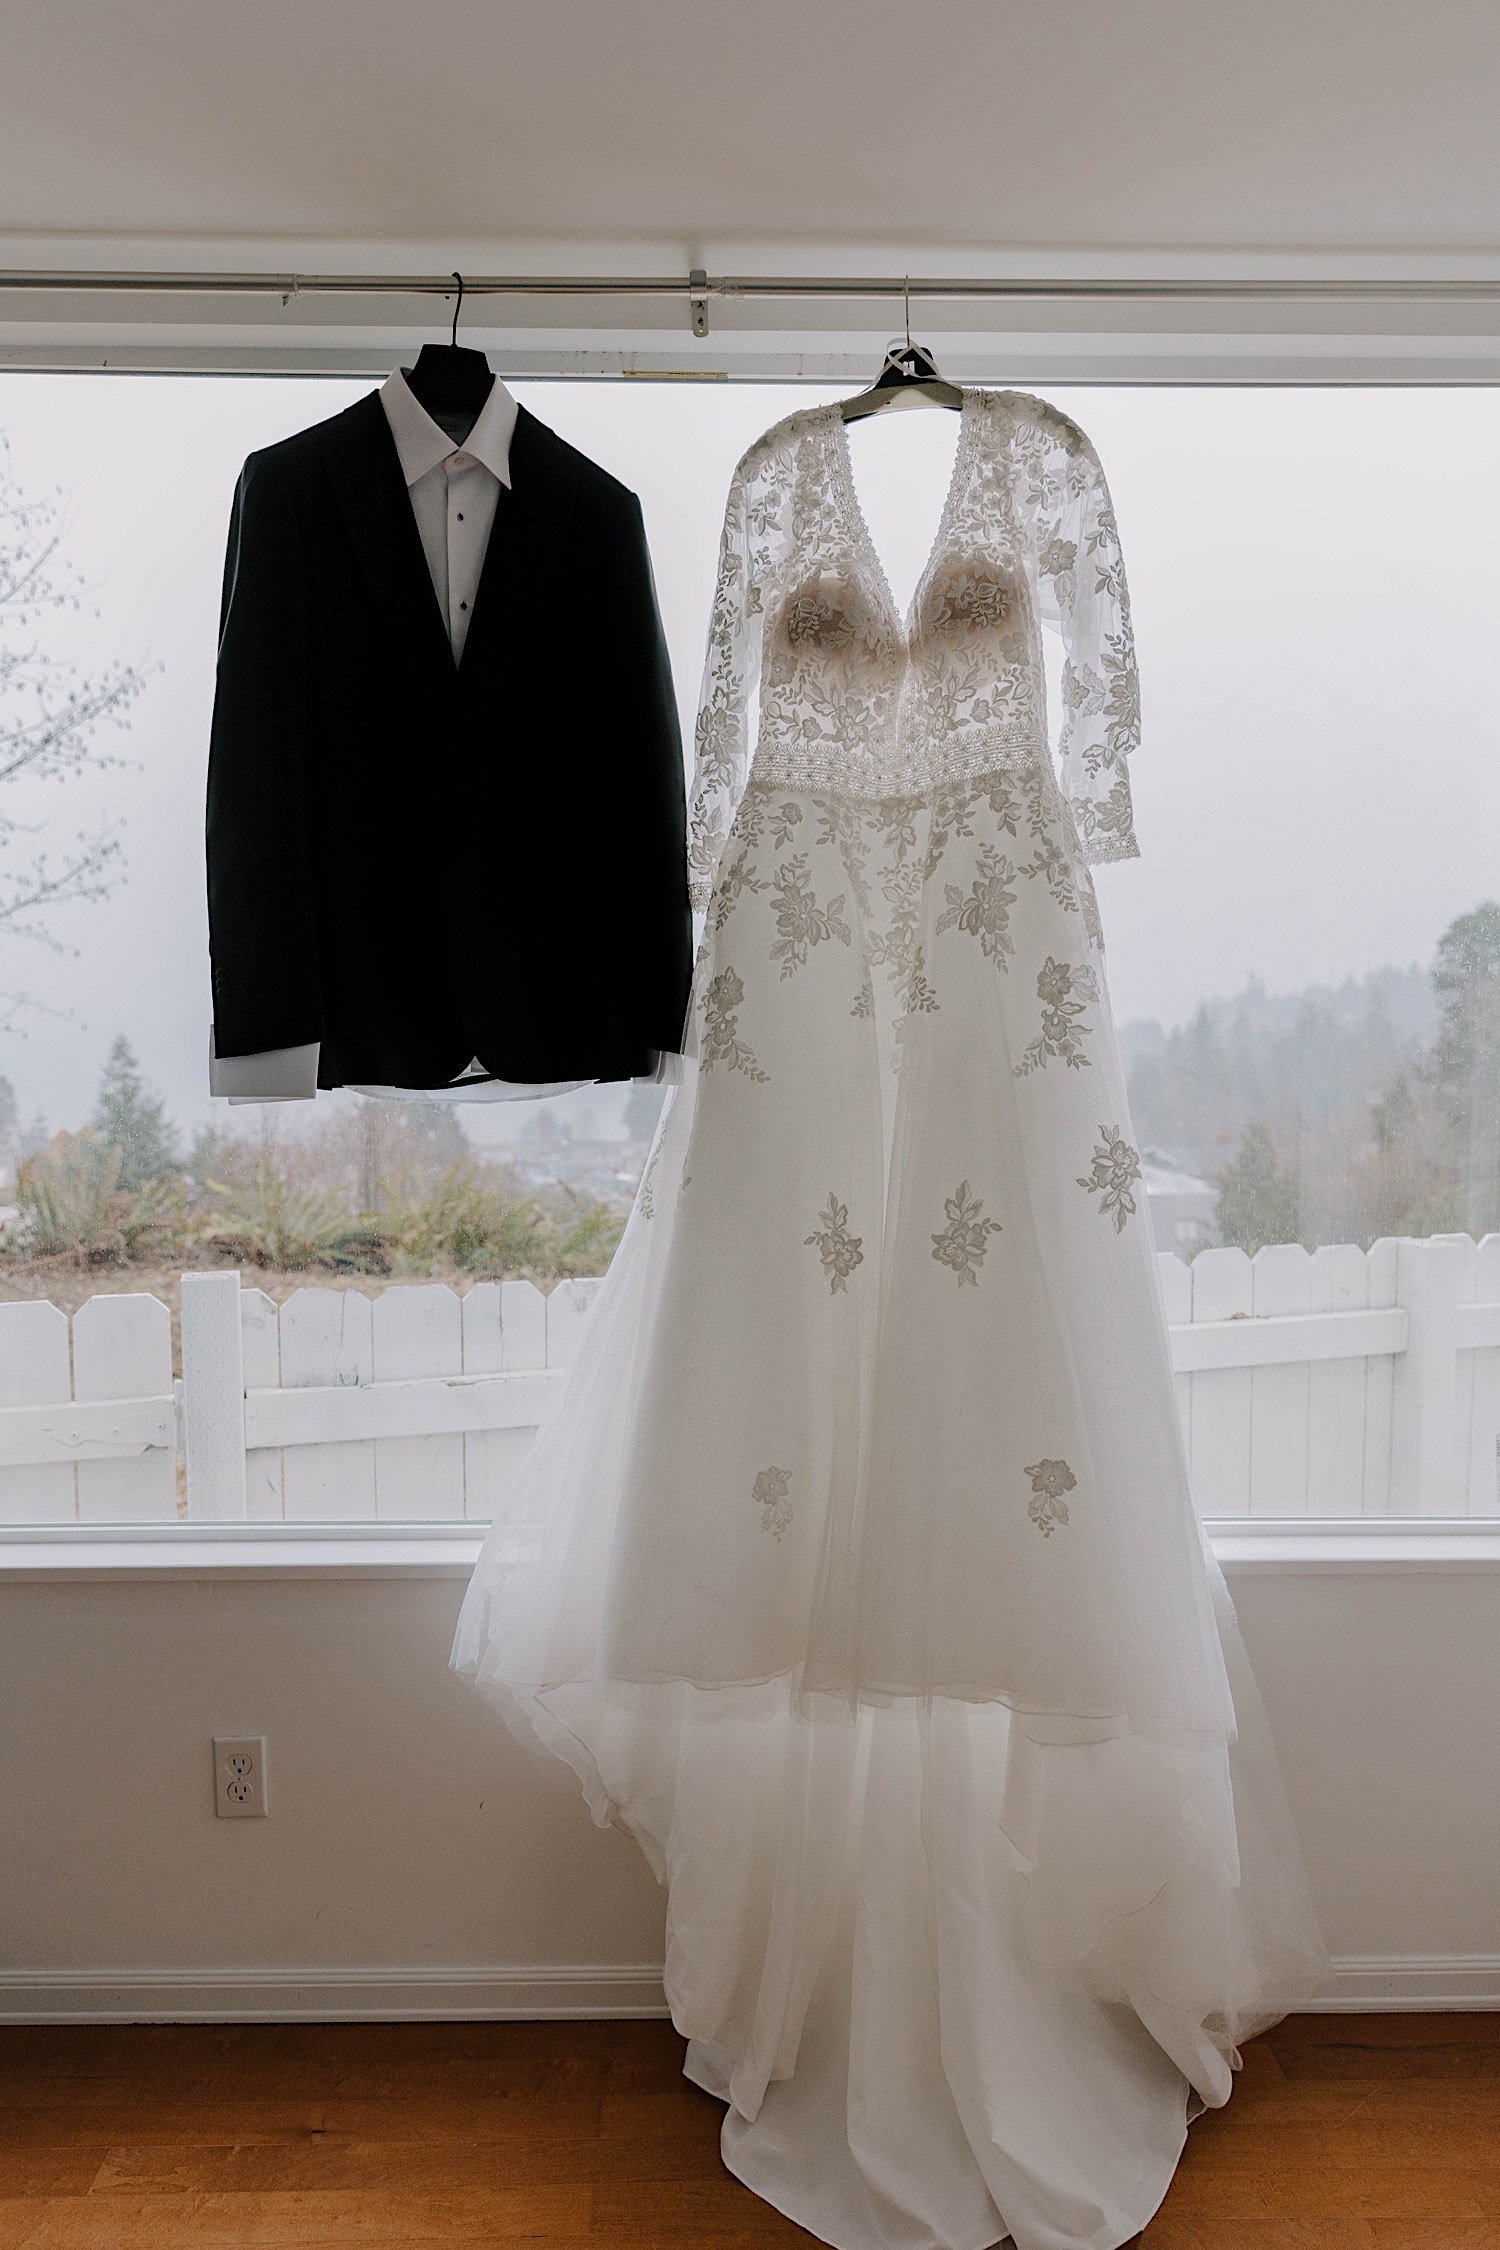 Hanging wedding dress and suit in front of a window